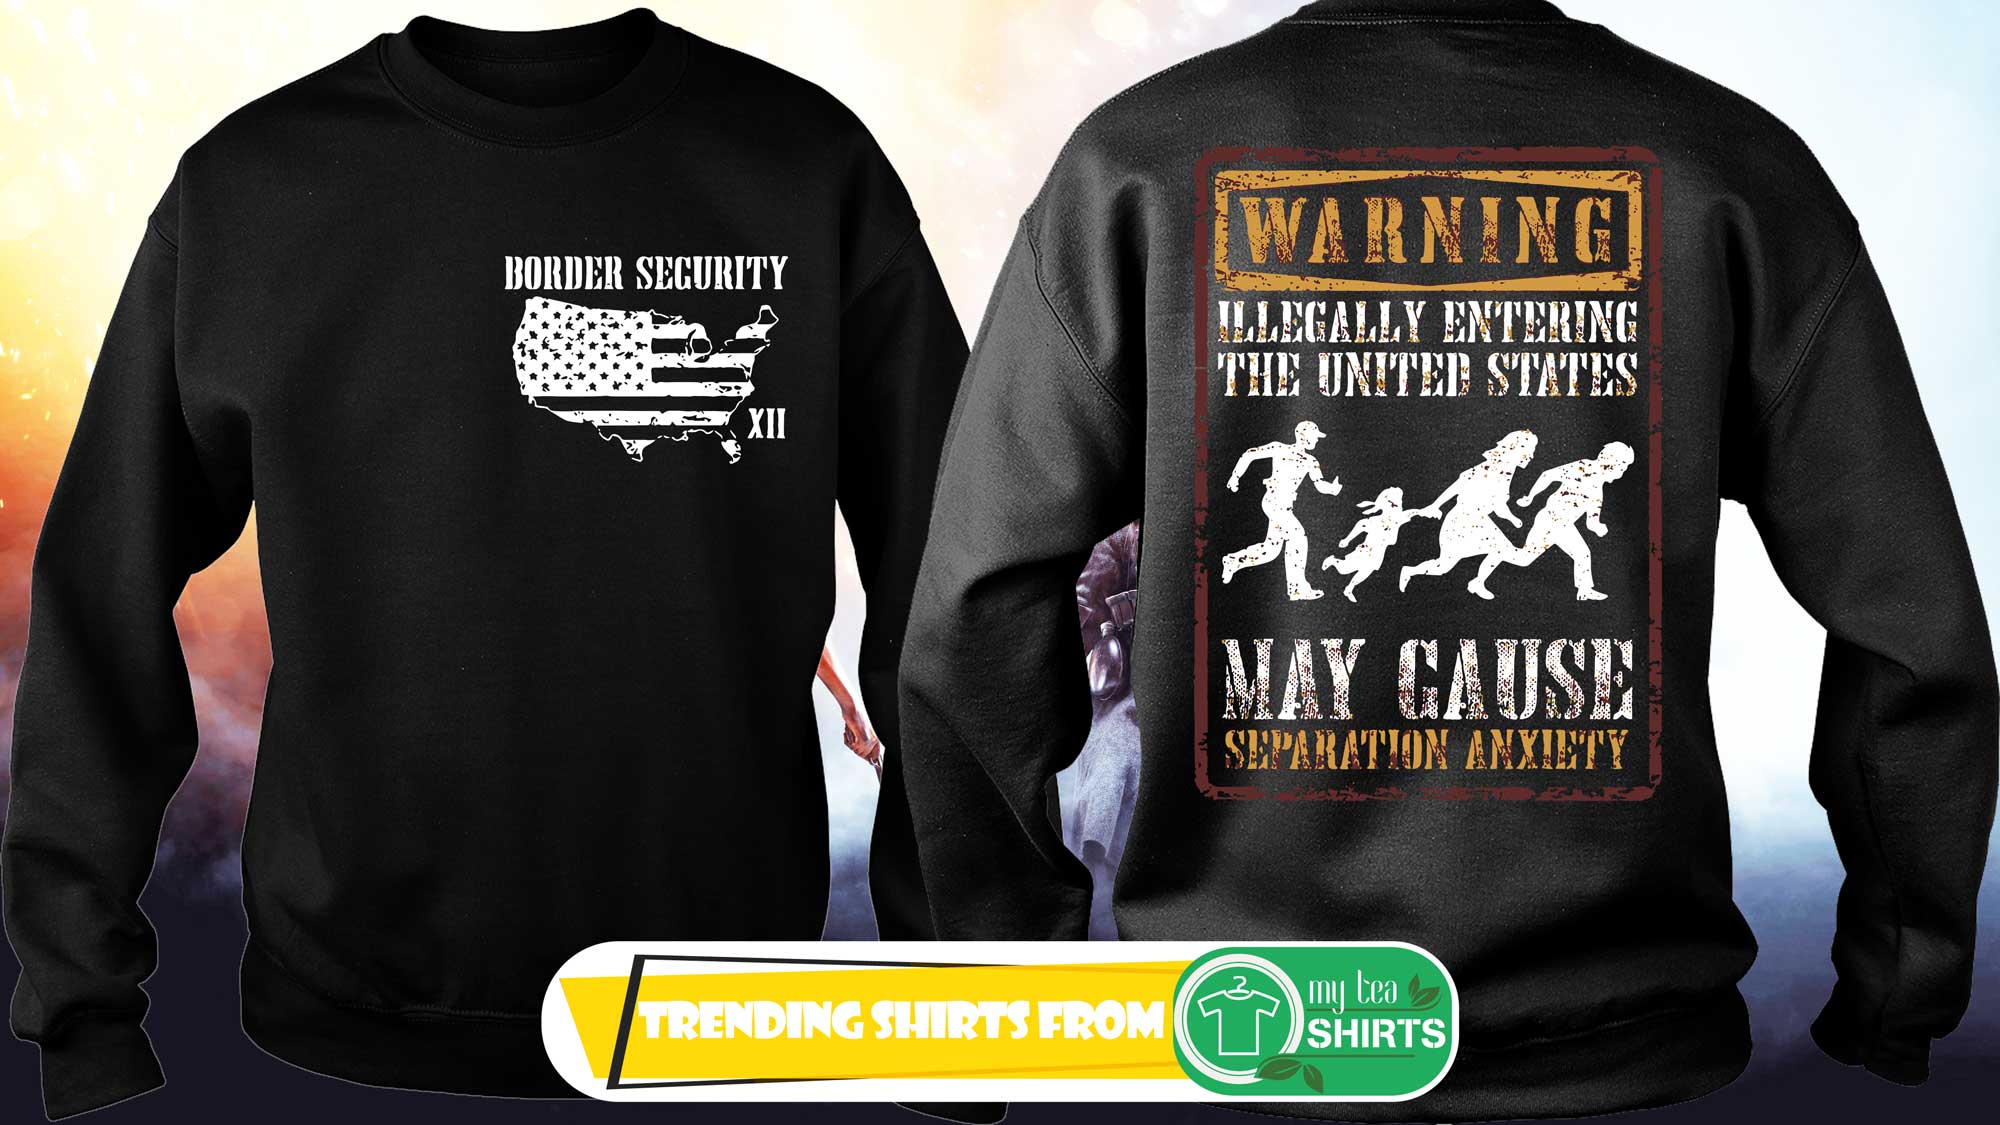 Warning Illegally entering The United States may cause separation anxiety shirt, guy tee, lady tee